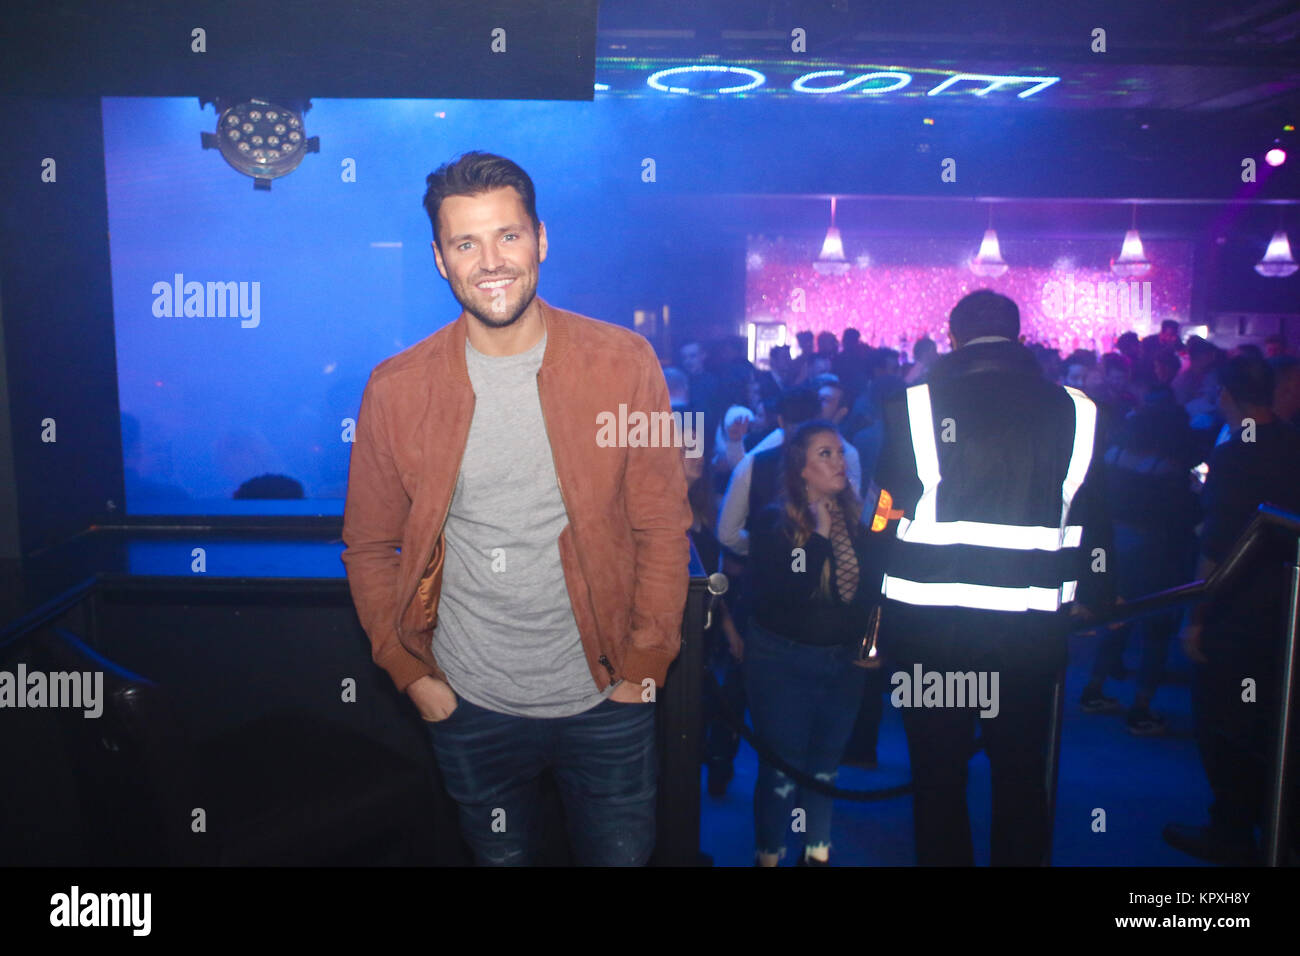 Watford, UK. 17th December, 2017. Mark Wright meets fans as he has a sober night with friend singing along to club classics and enjoying the atmosphere at VIP club Hydeout 2.0. He kept low key throughout the evening spending time in the dj booth but declining to speak over the mic and then heading to the vip area. He filled in for TOWIE chum James Argent who was meant to be at the club but was ill on the night. Credit: Ayeesha Walsh/Alamy Live News Stock Photo